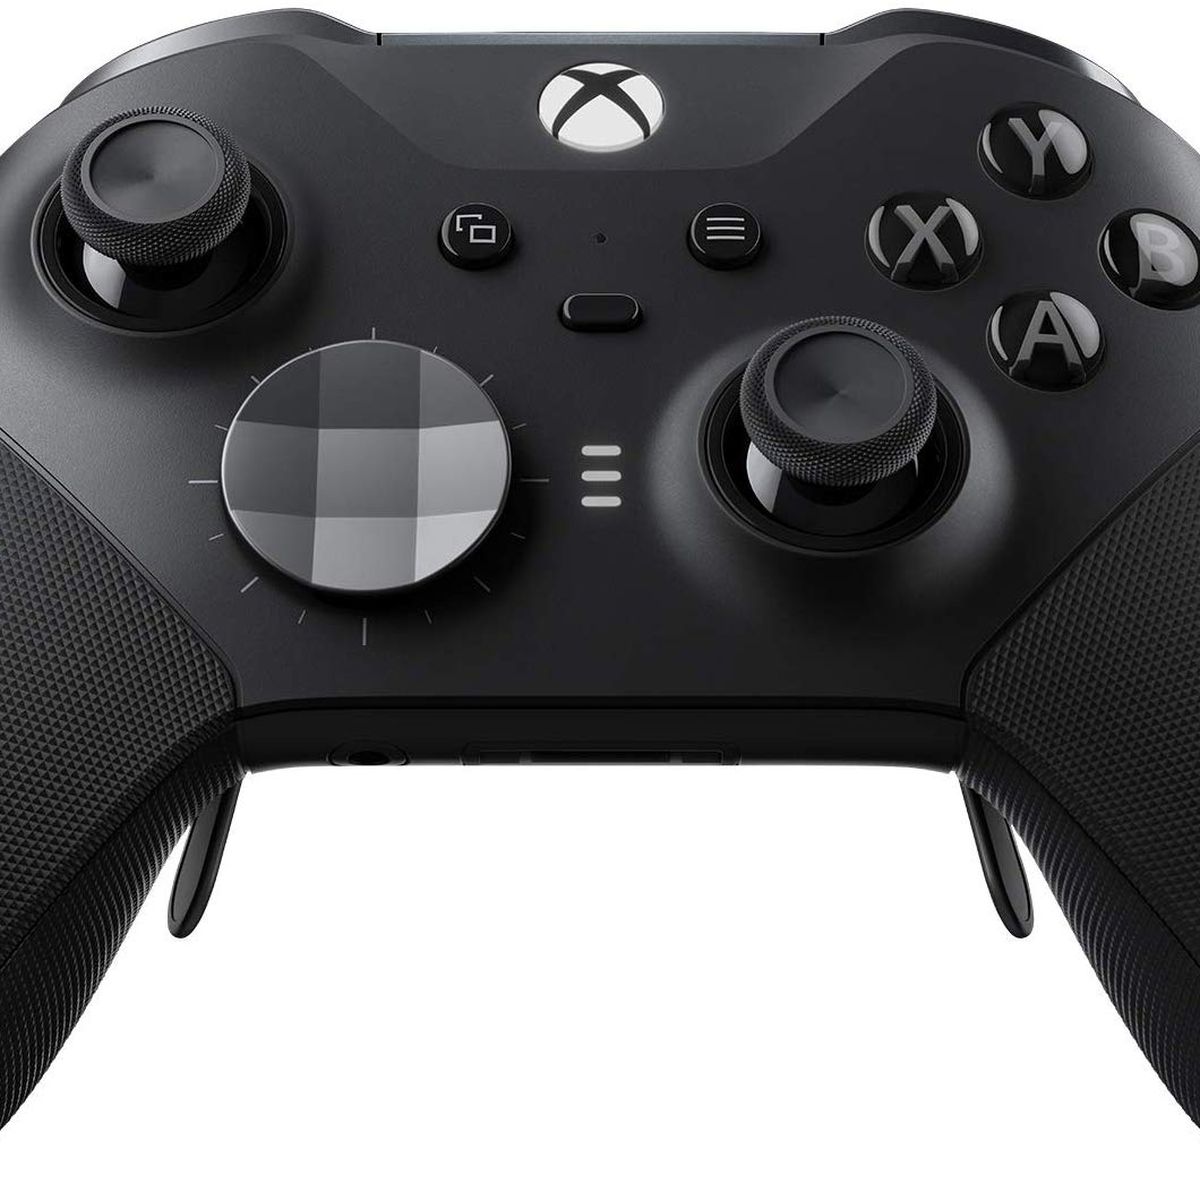 A product shot of the Xbox Elite Wireless Controller Series 2